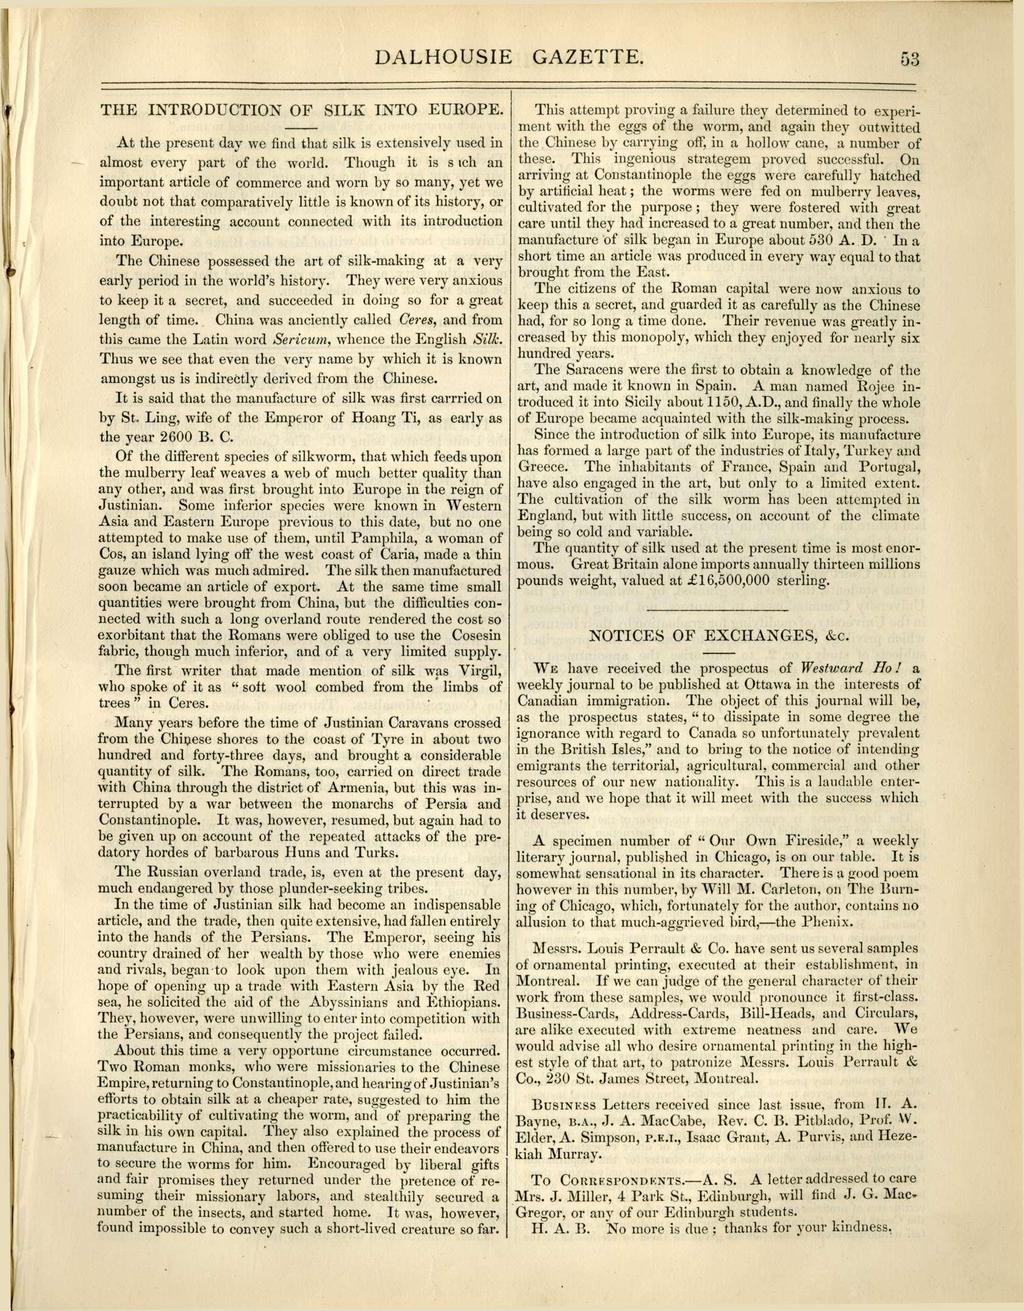 DALHOUSIE GAZETTE. 53 THE INTRODUCTION OF SILK INTO EUROPE. At the pesent day we find that silk is extensively used in almost evey pat of the wold.